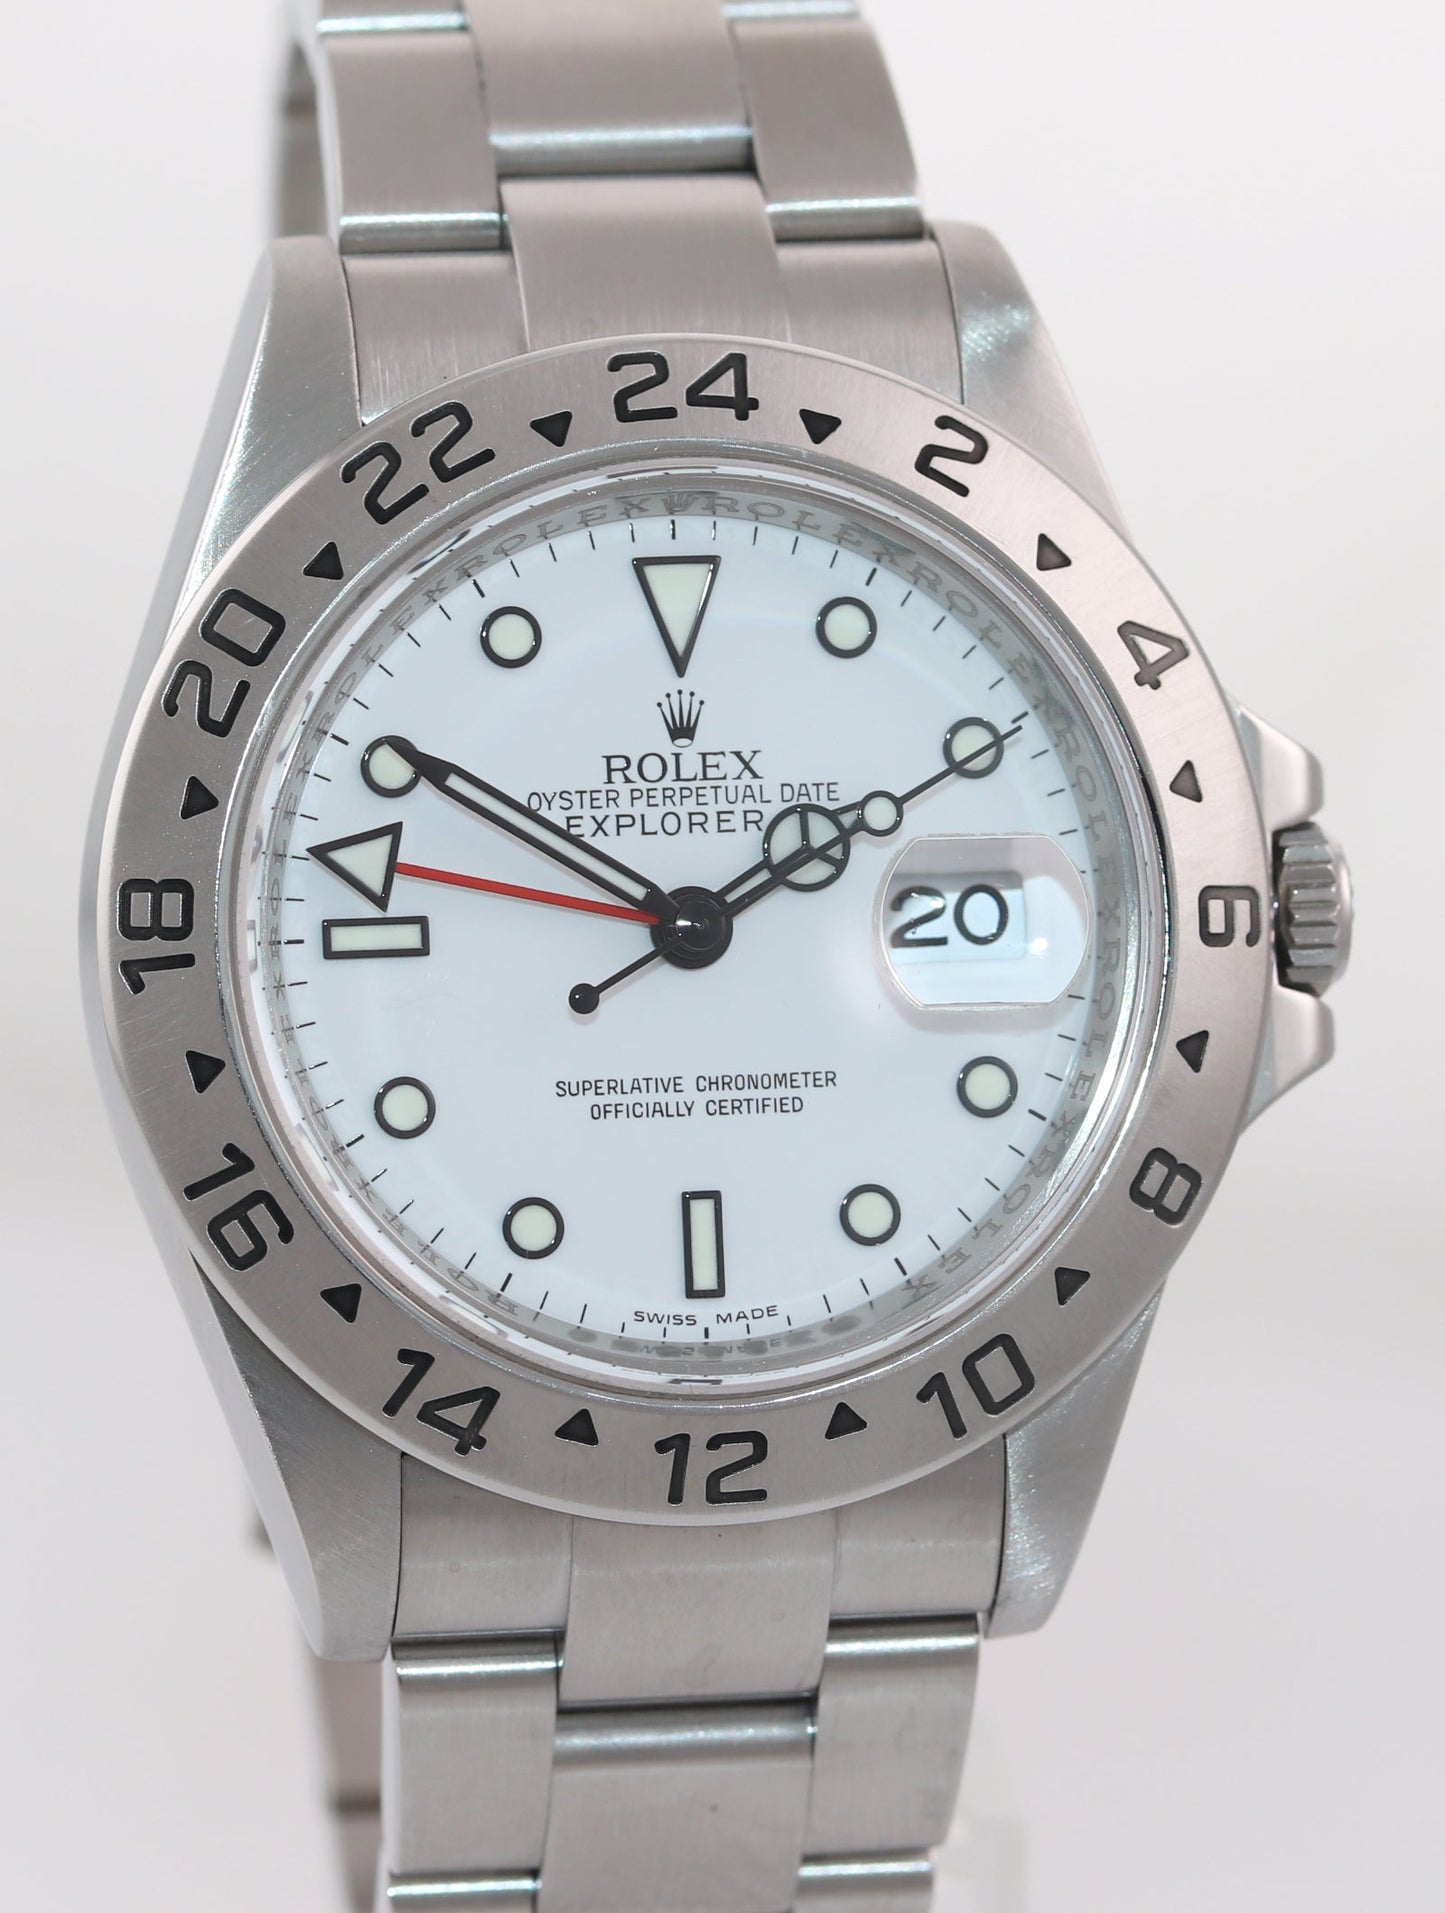 2011 PAPERS Rolex Explorer II 16570 Polar White Dial Steel 40mm 3186 Watch Box